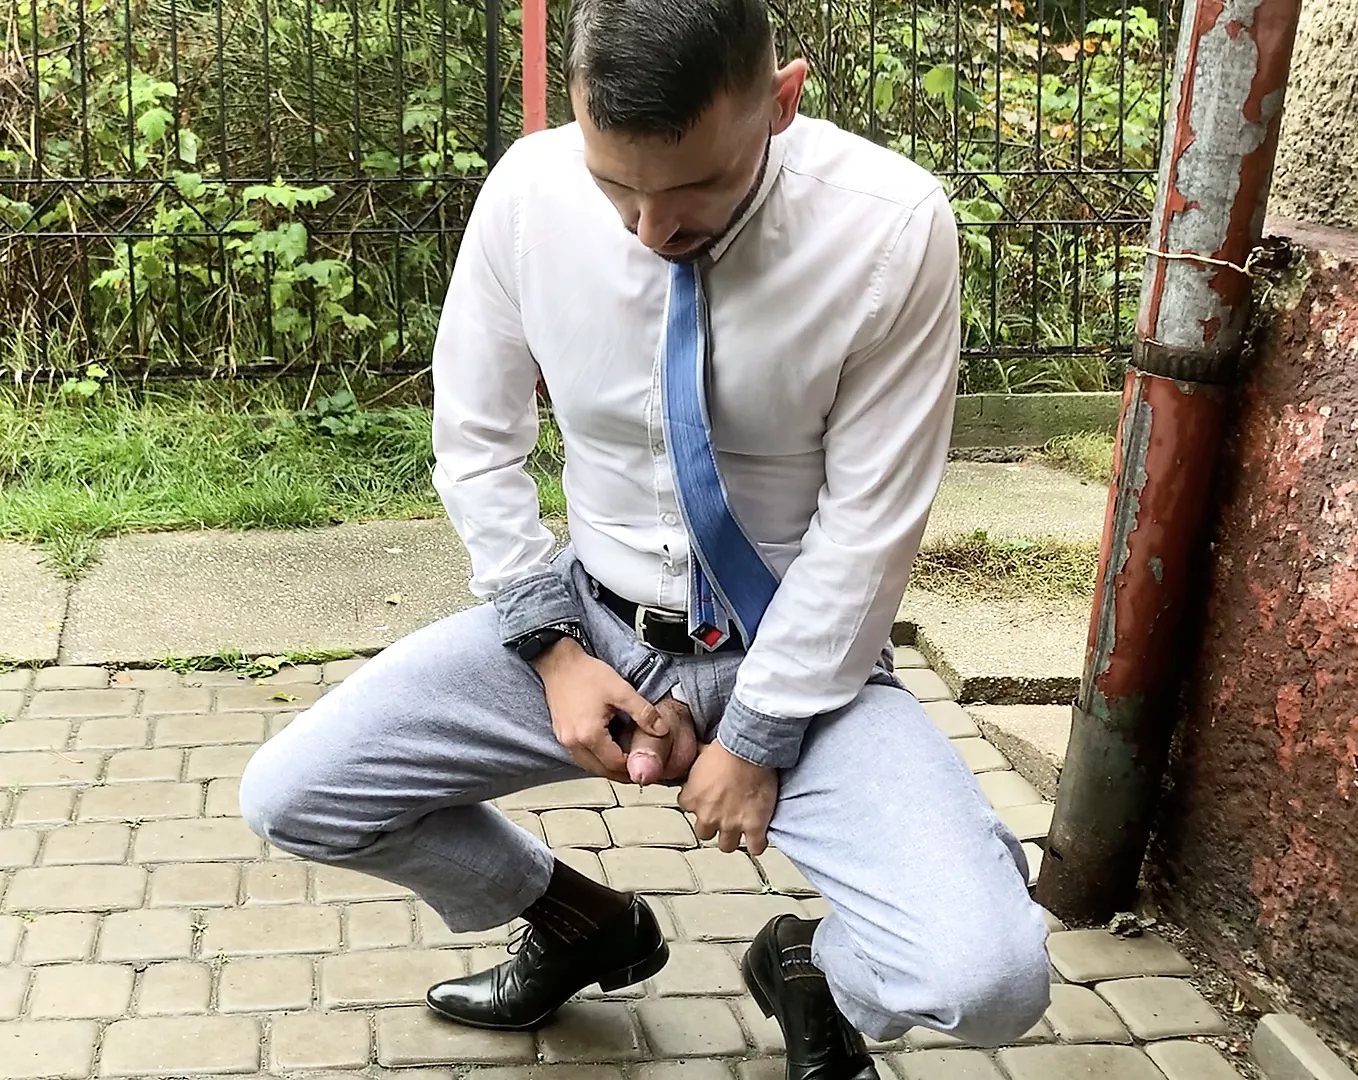 outdoor pissing in suit and